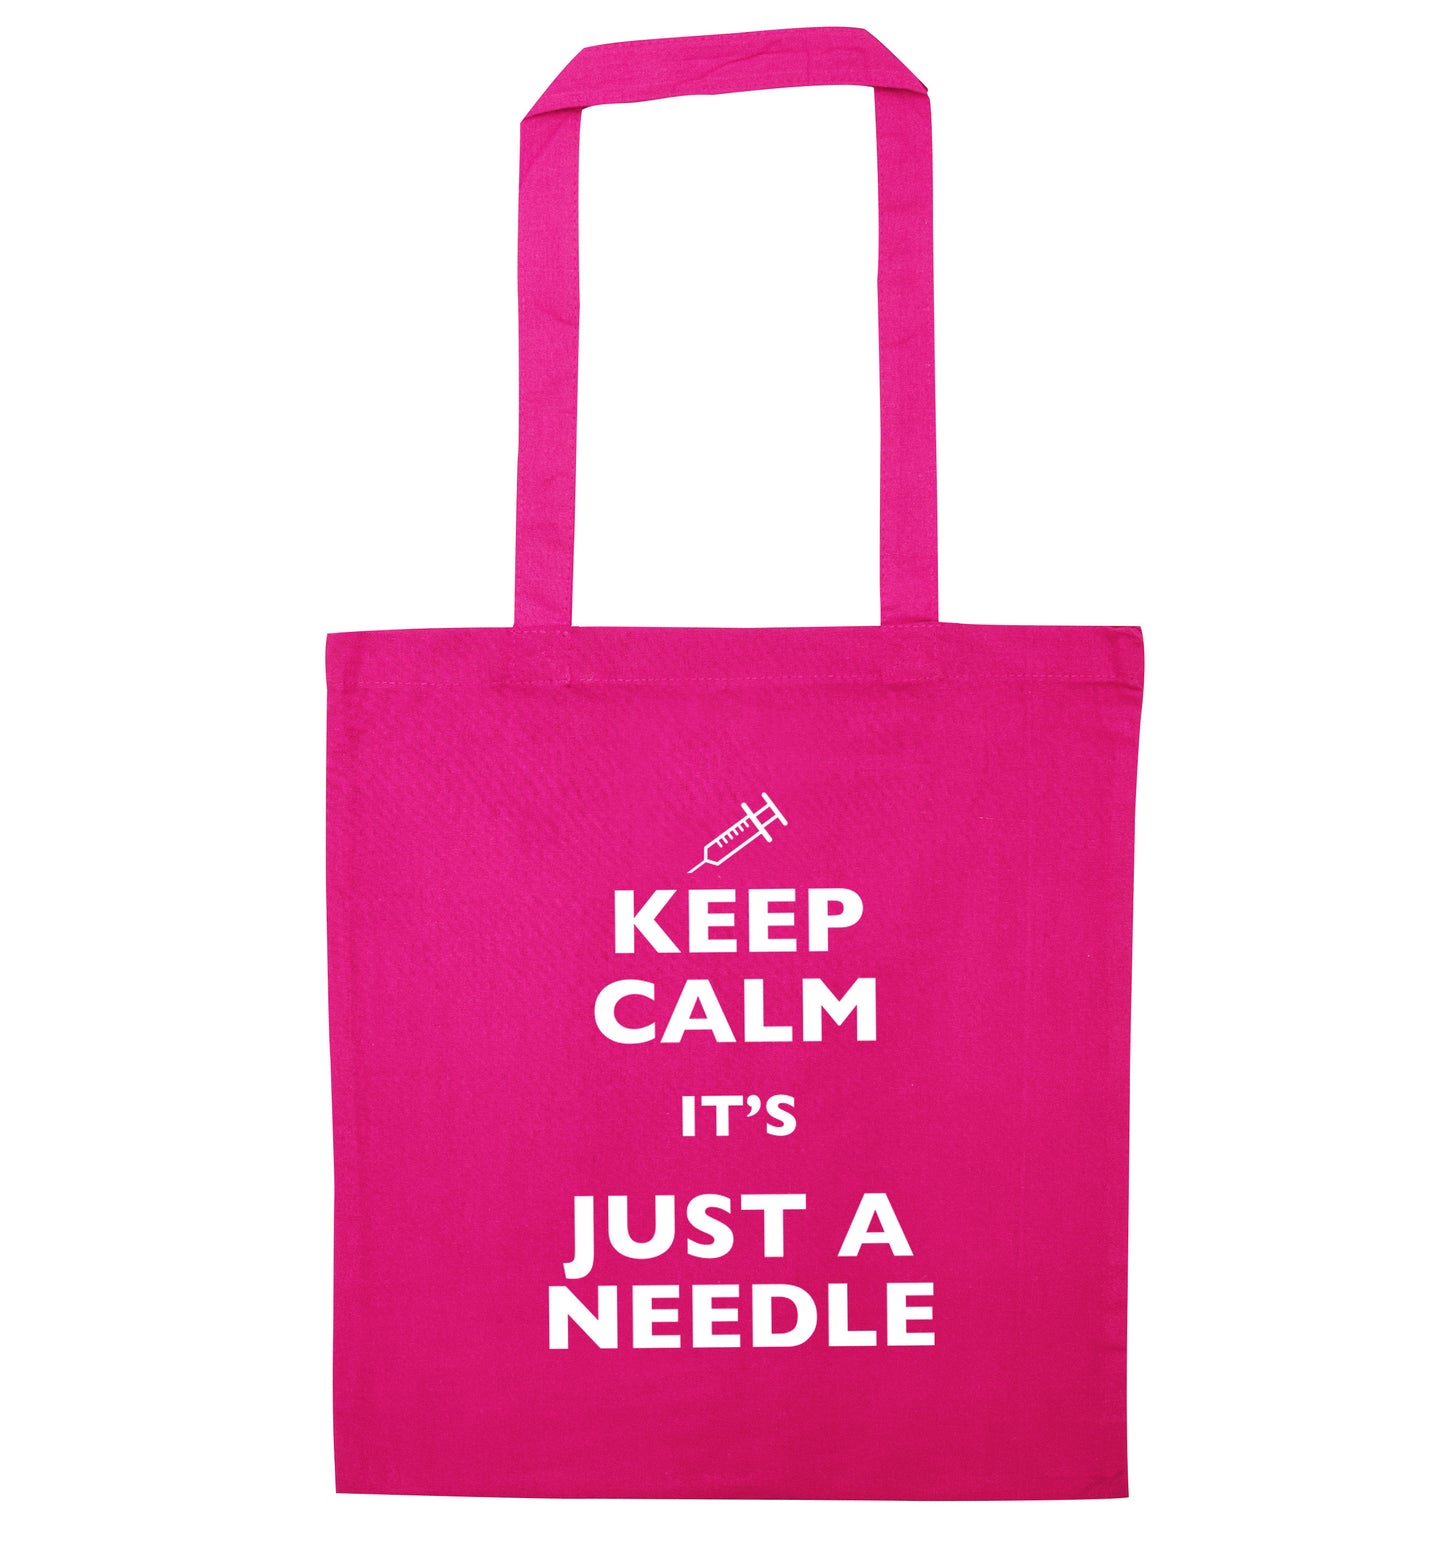 Keep calm it's only a needle pink tote bag